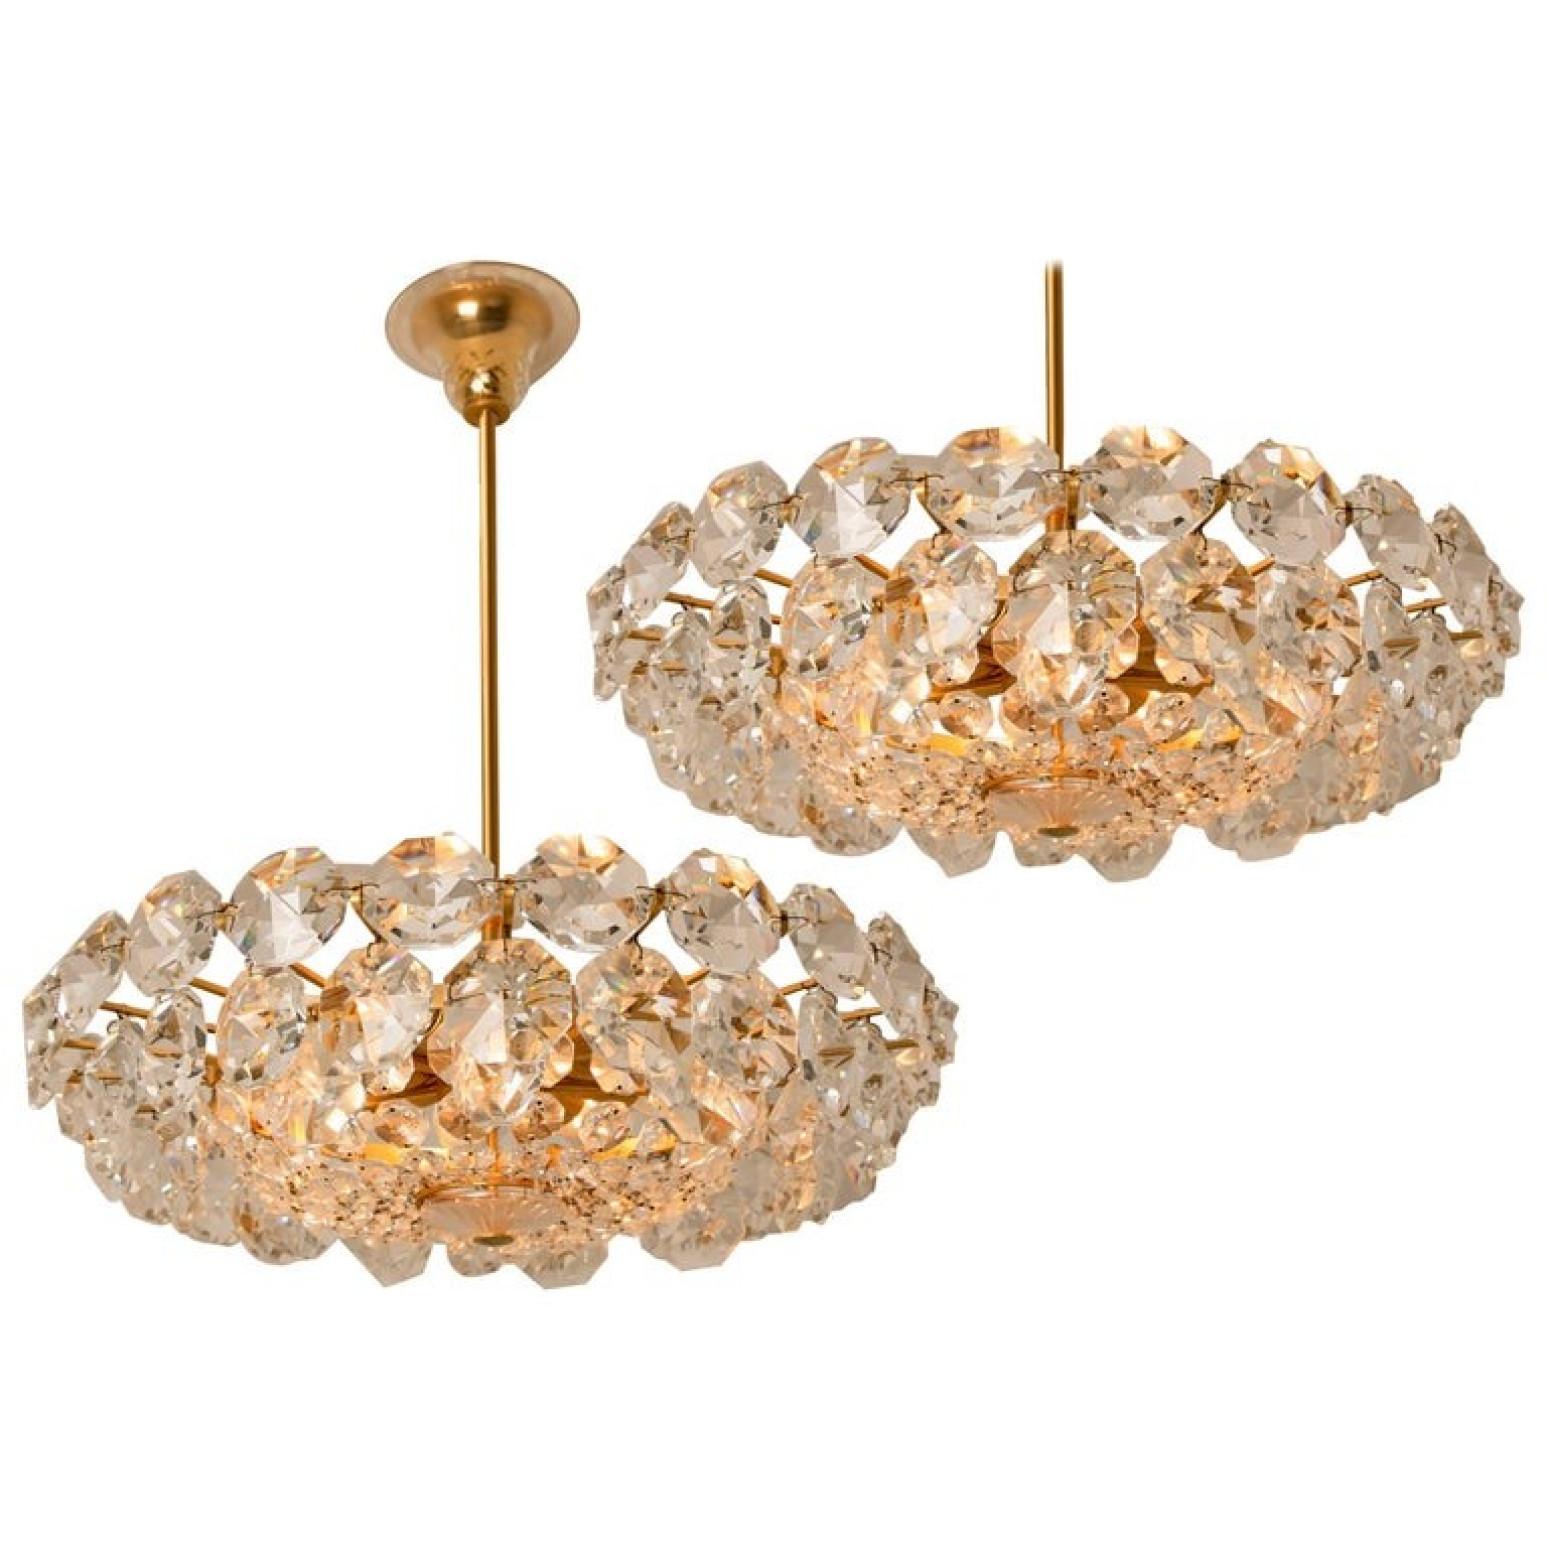 A stunning modern chandelier by Bakalowits. Handmade and high-quality piece. Featuring large-scale octagonal faceted crystals on a 22-karat gold washed brass frame and chain. The fixture is made of gilt brass and has three rings with lots of faceted